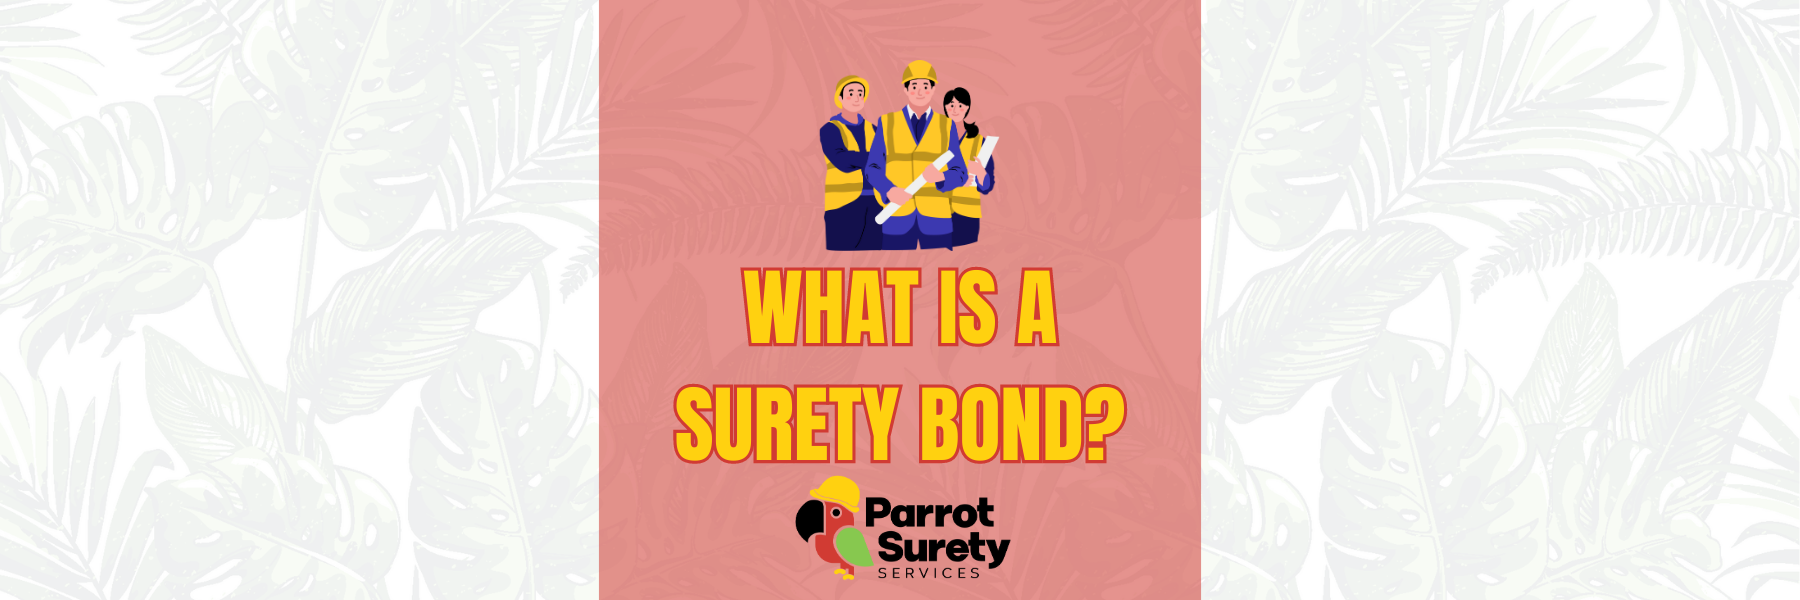 what is a surety bond title image with contractors by parrot surety services